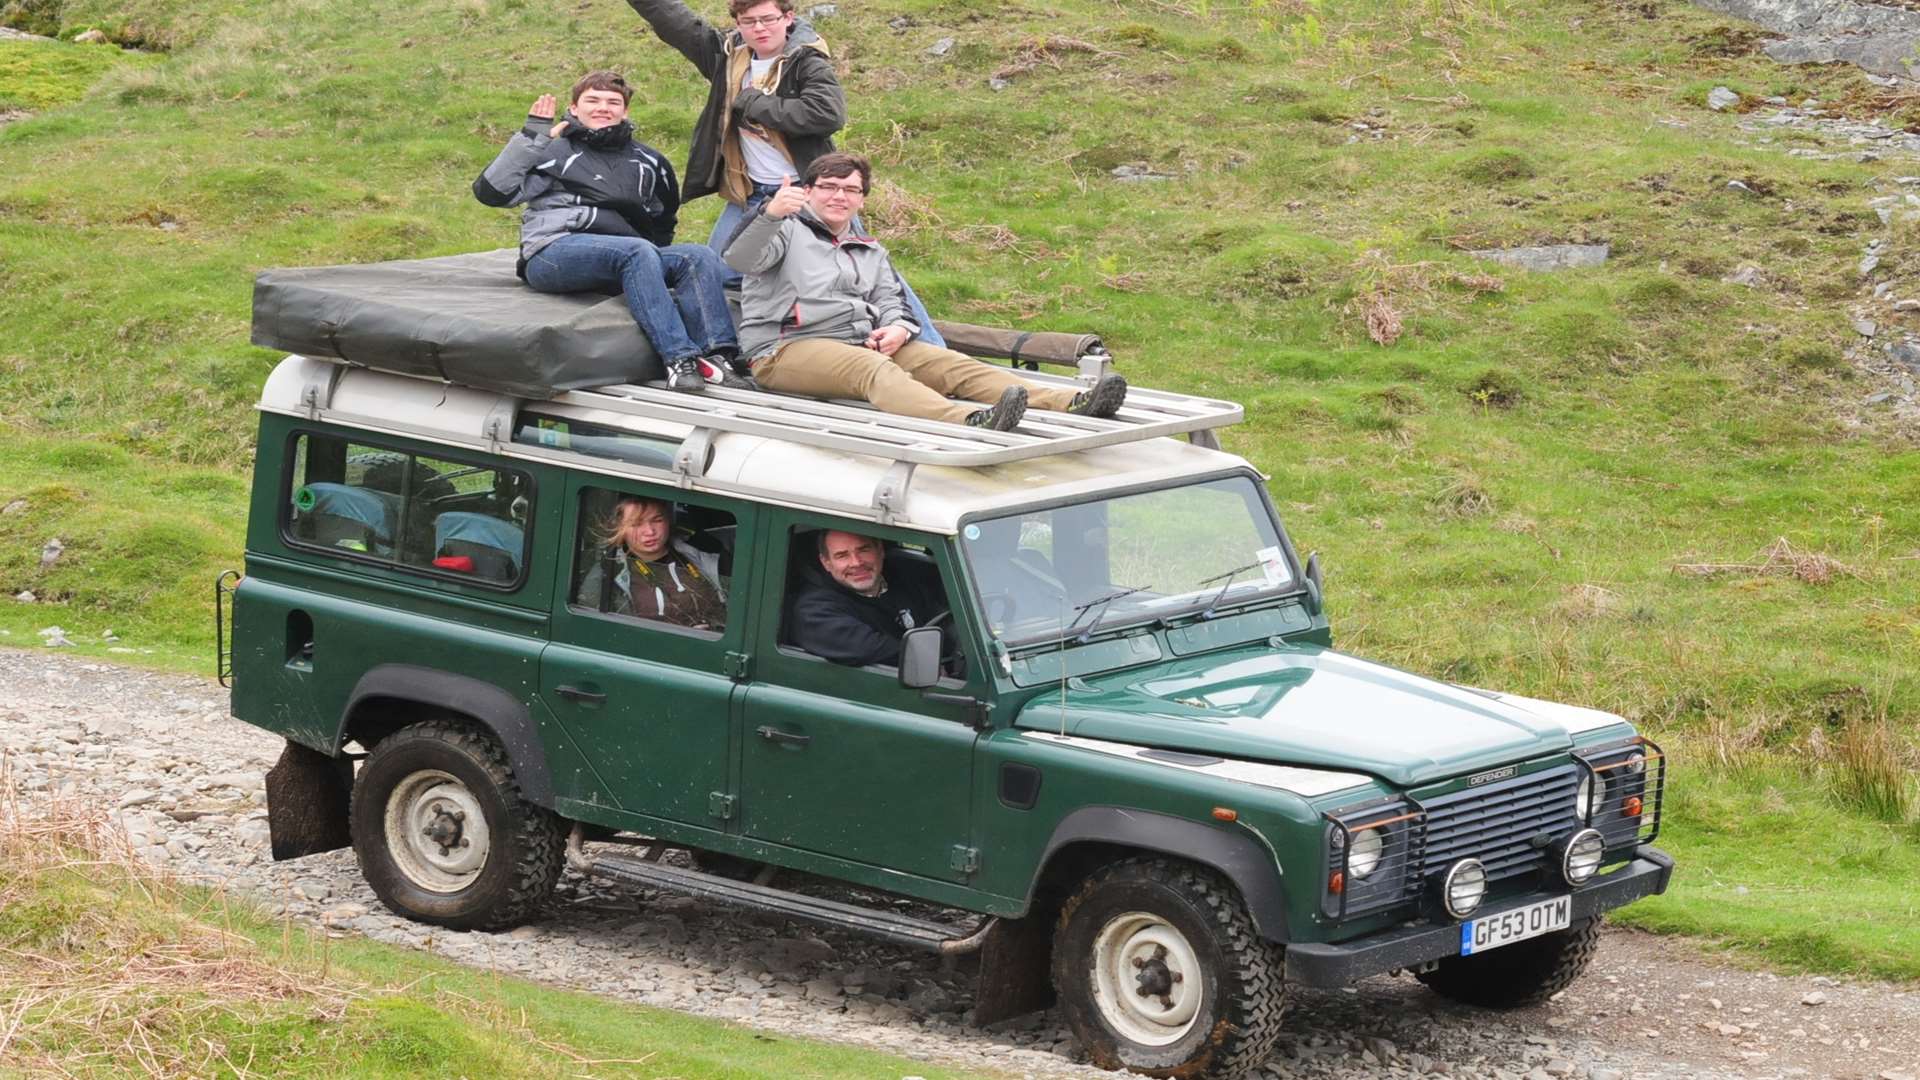 The family on holiday in the Land Rover taken from their home.